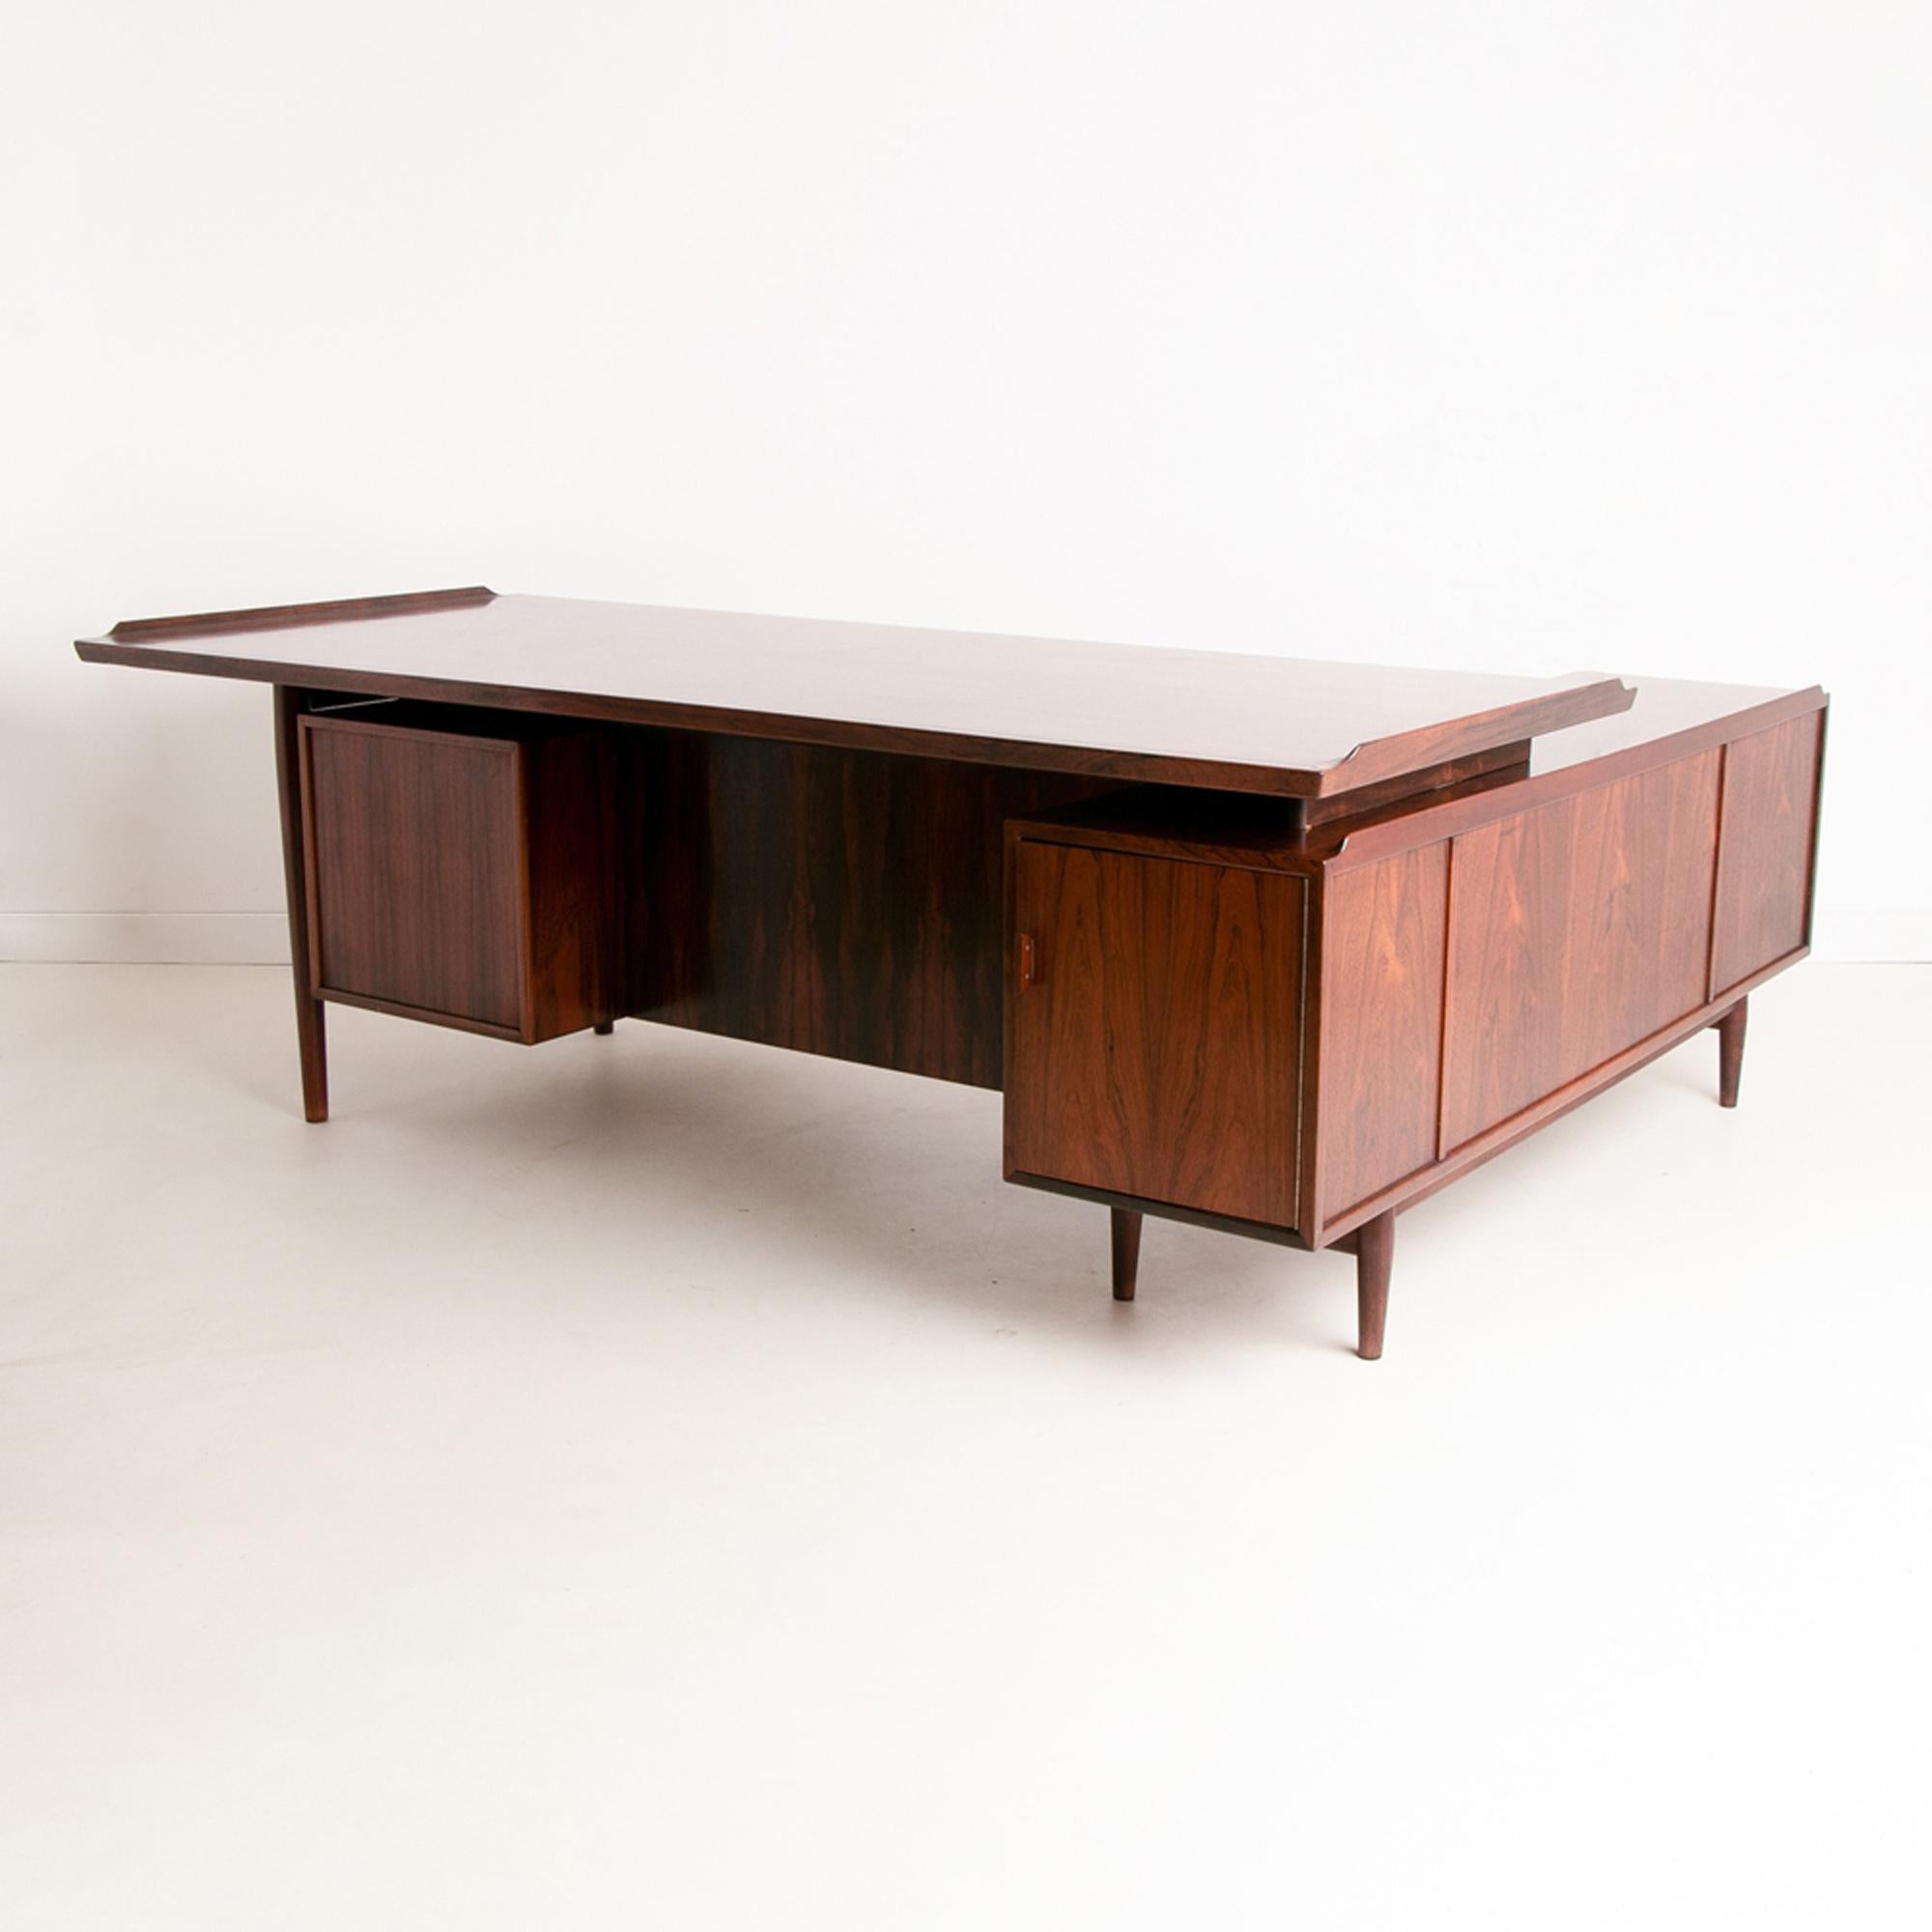 A Danish midcentury rosewood corner desk designed by Arne Vodder for Sibast Mobler. The desk features a sideboard to the left of the desk adding extra storage and surface space.